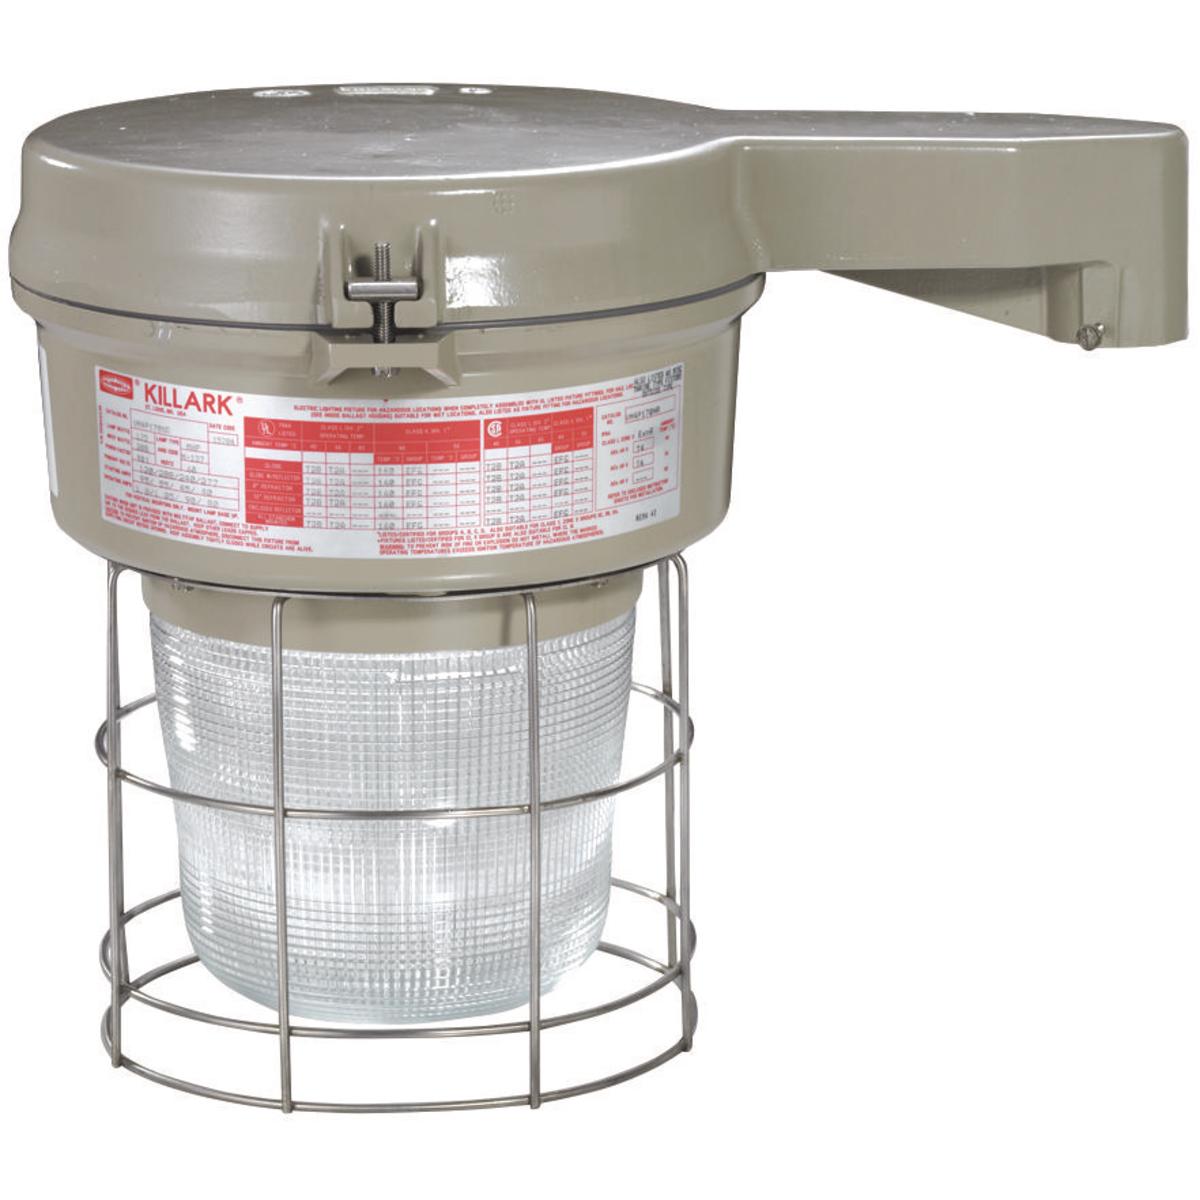 Hubbell VM4H100S5R5G VM4 Series - 100W Metal Halide Quadri-Volt - 1-1/2" Stanchion Mount - Type V Glass Refractor and Guard  ; Ballast tank and splice box – corrosion resistant copper-free aluminum alloy with baked powder epoxy/polyester finish, electrostatically applied for 